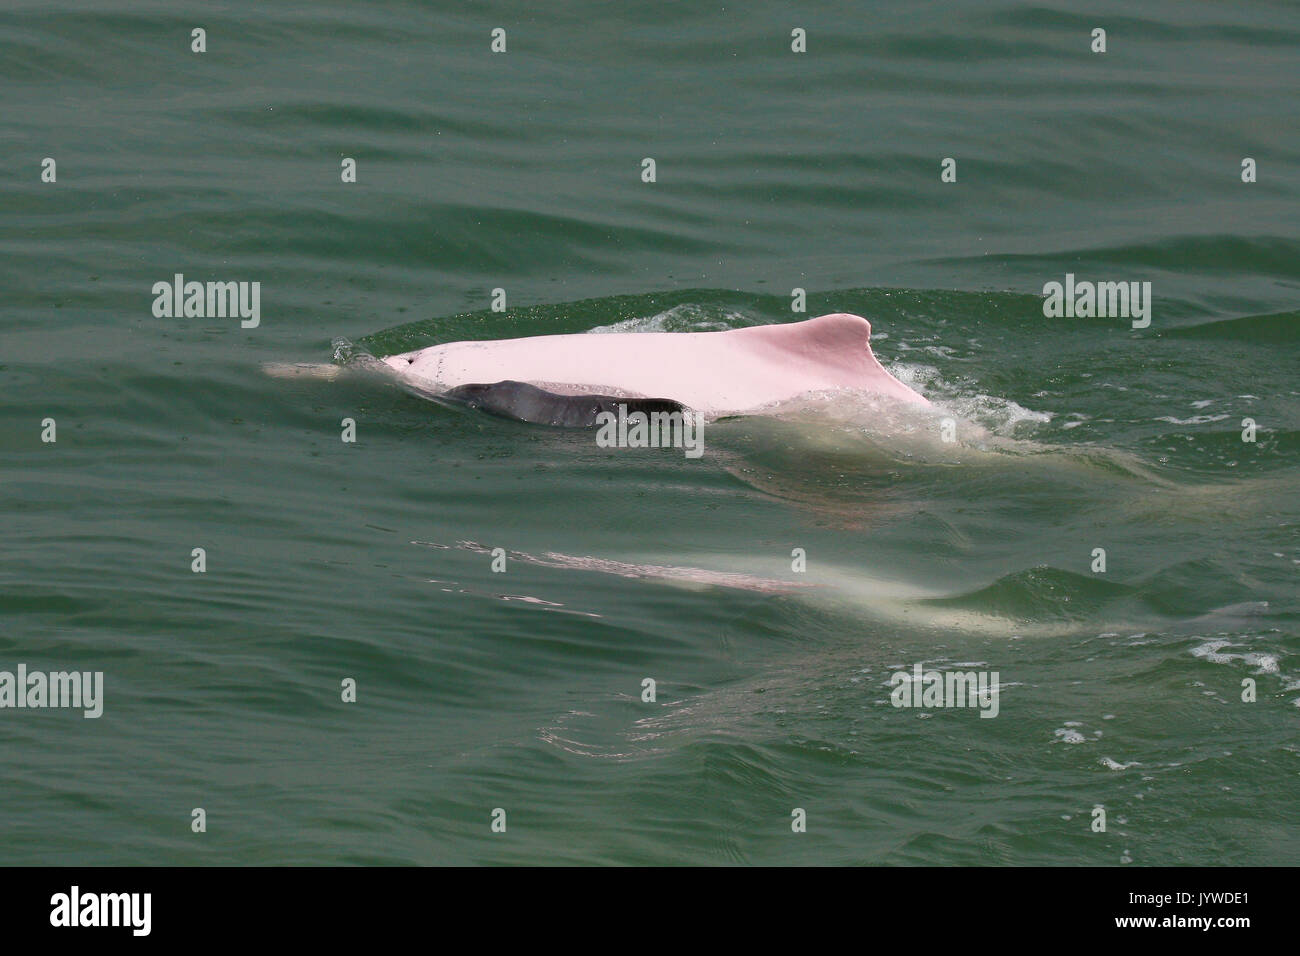 Indo-Pacific Humpback Dolphin (Sousa chinensis) mother and new born baby with foetal folds in HK waters. Stock Photo